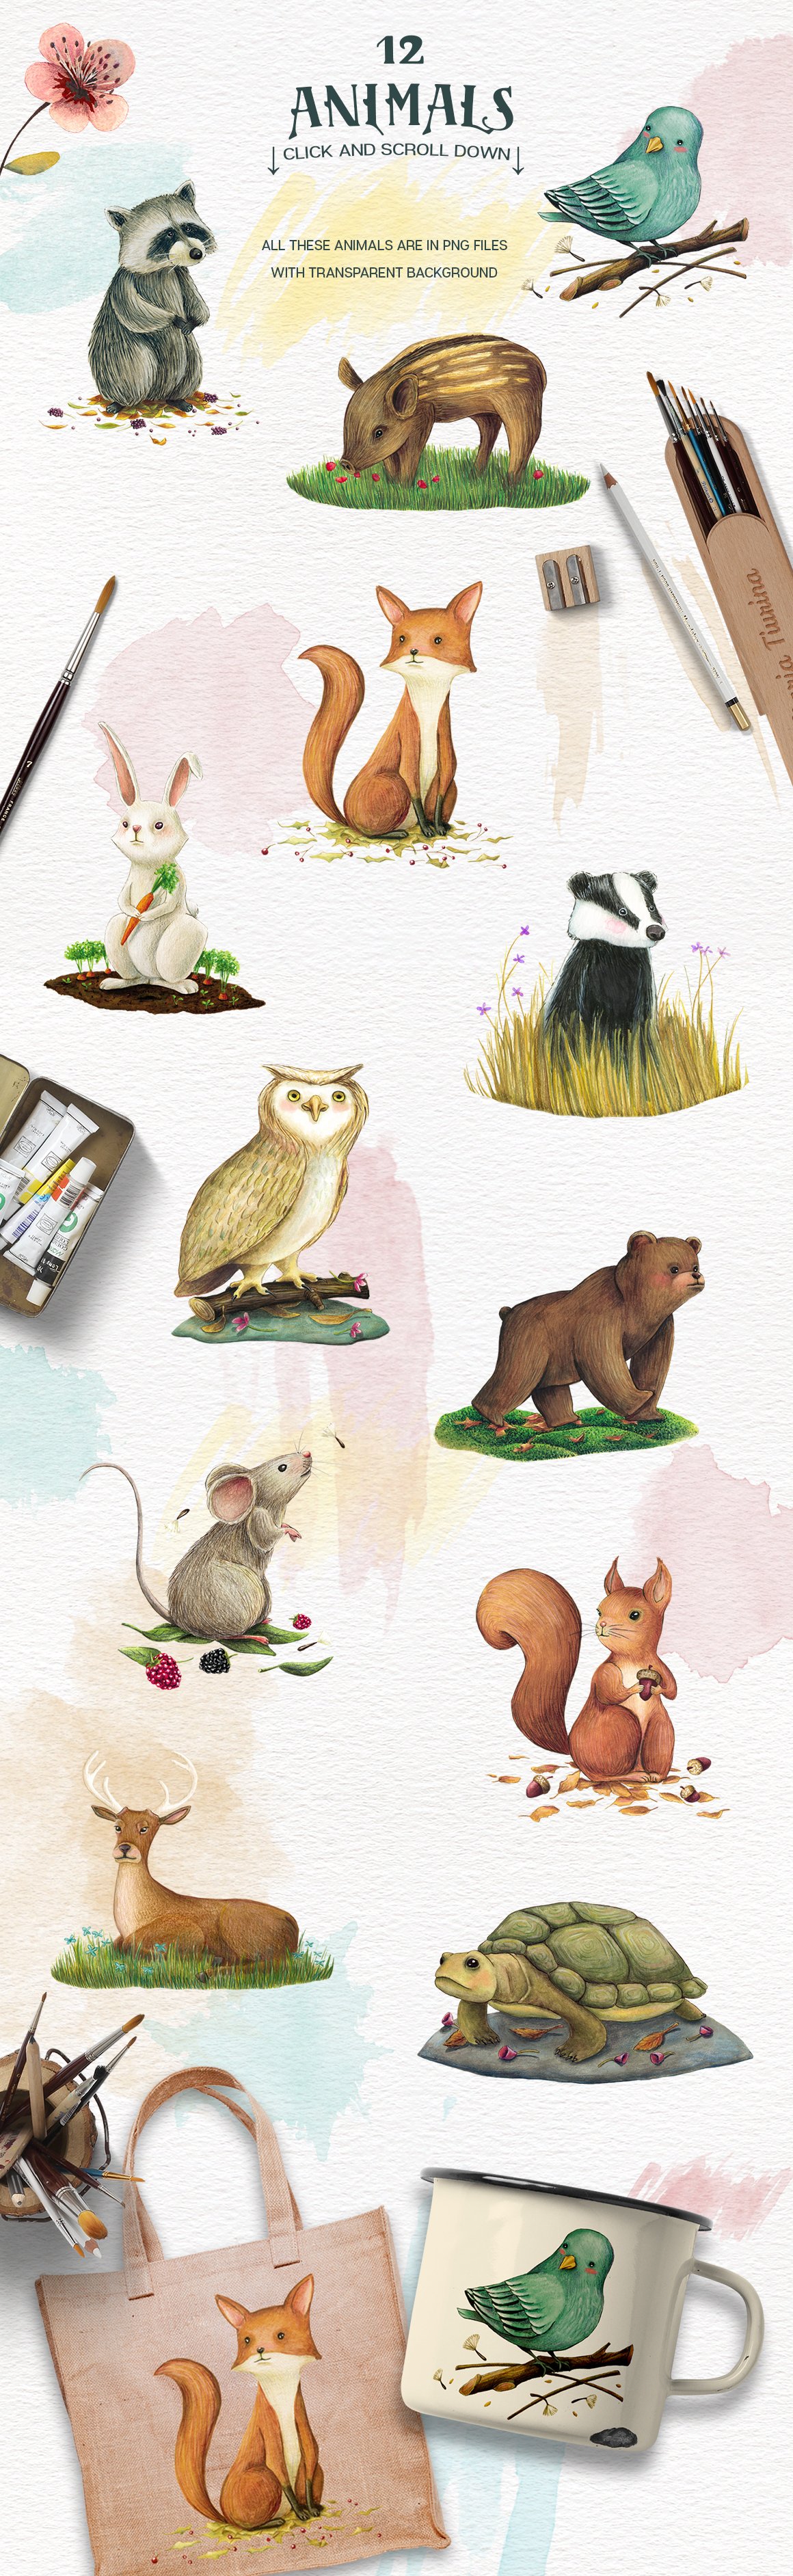 Animals and Nature - Design Kit preview image.